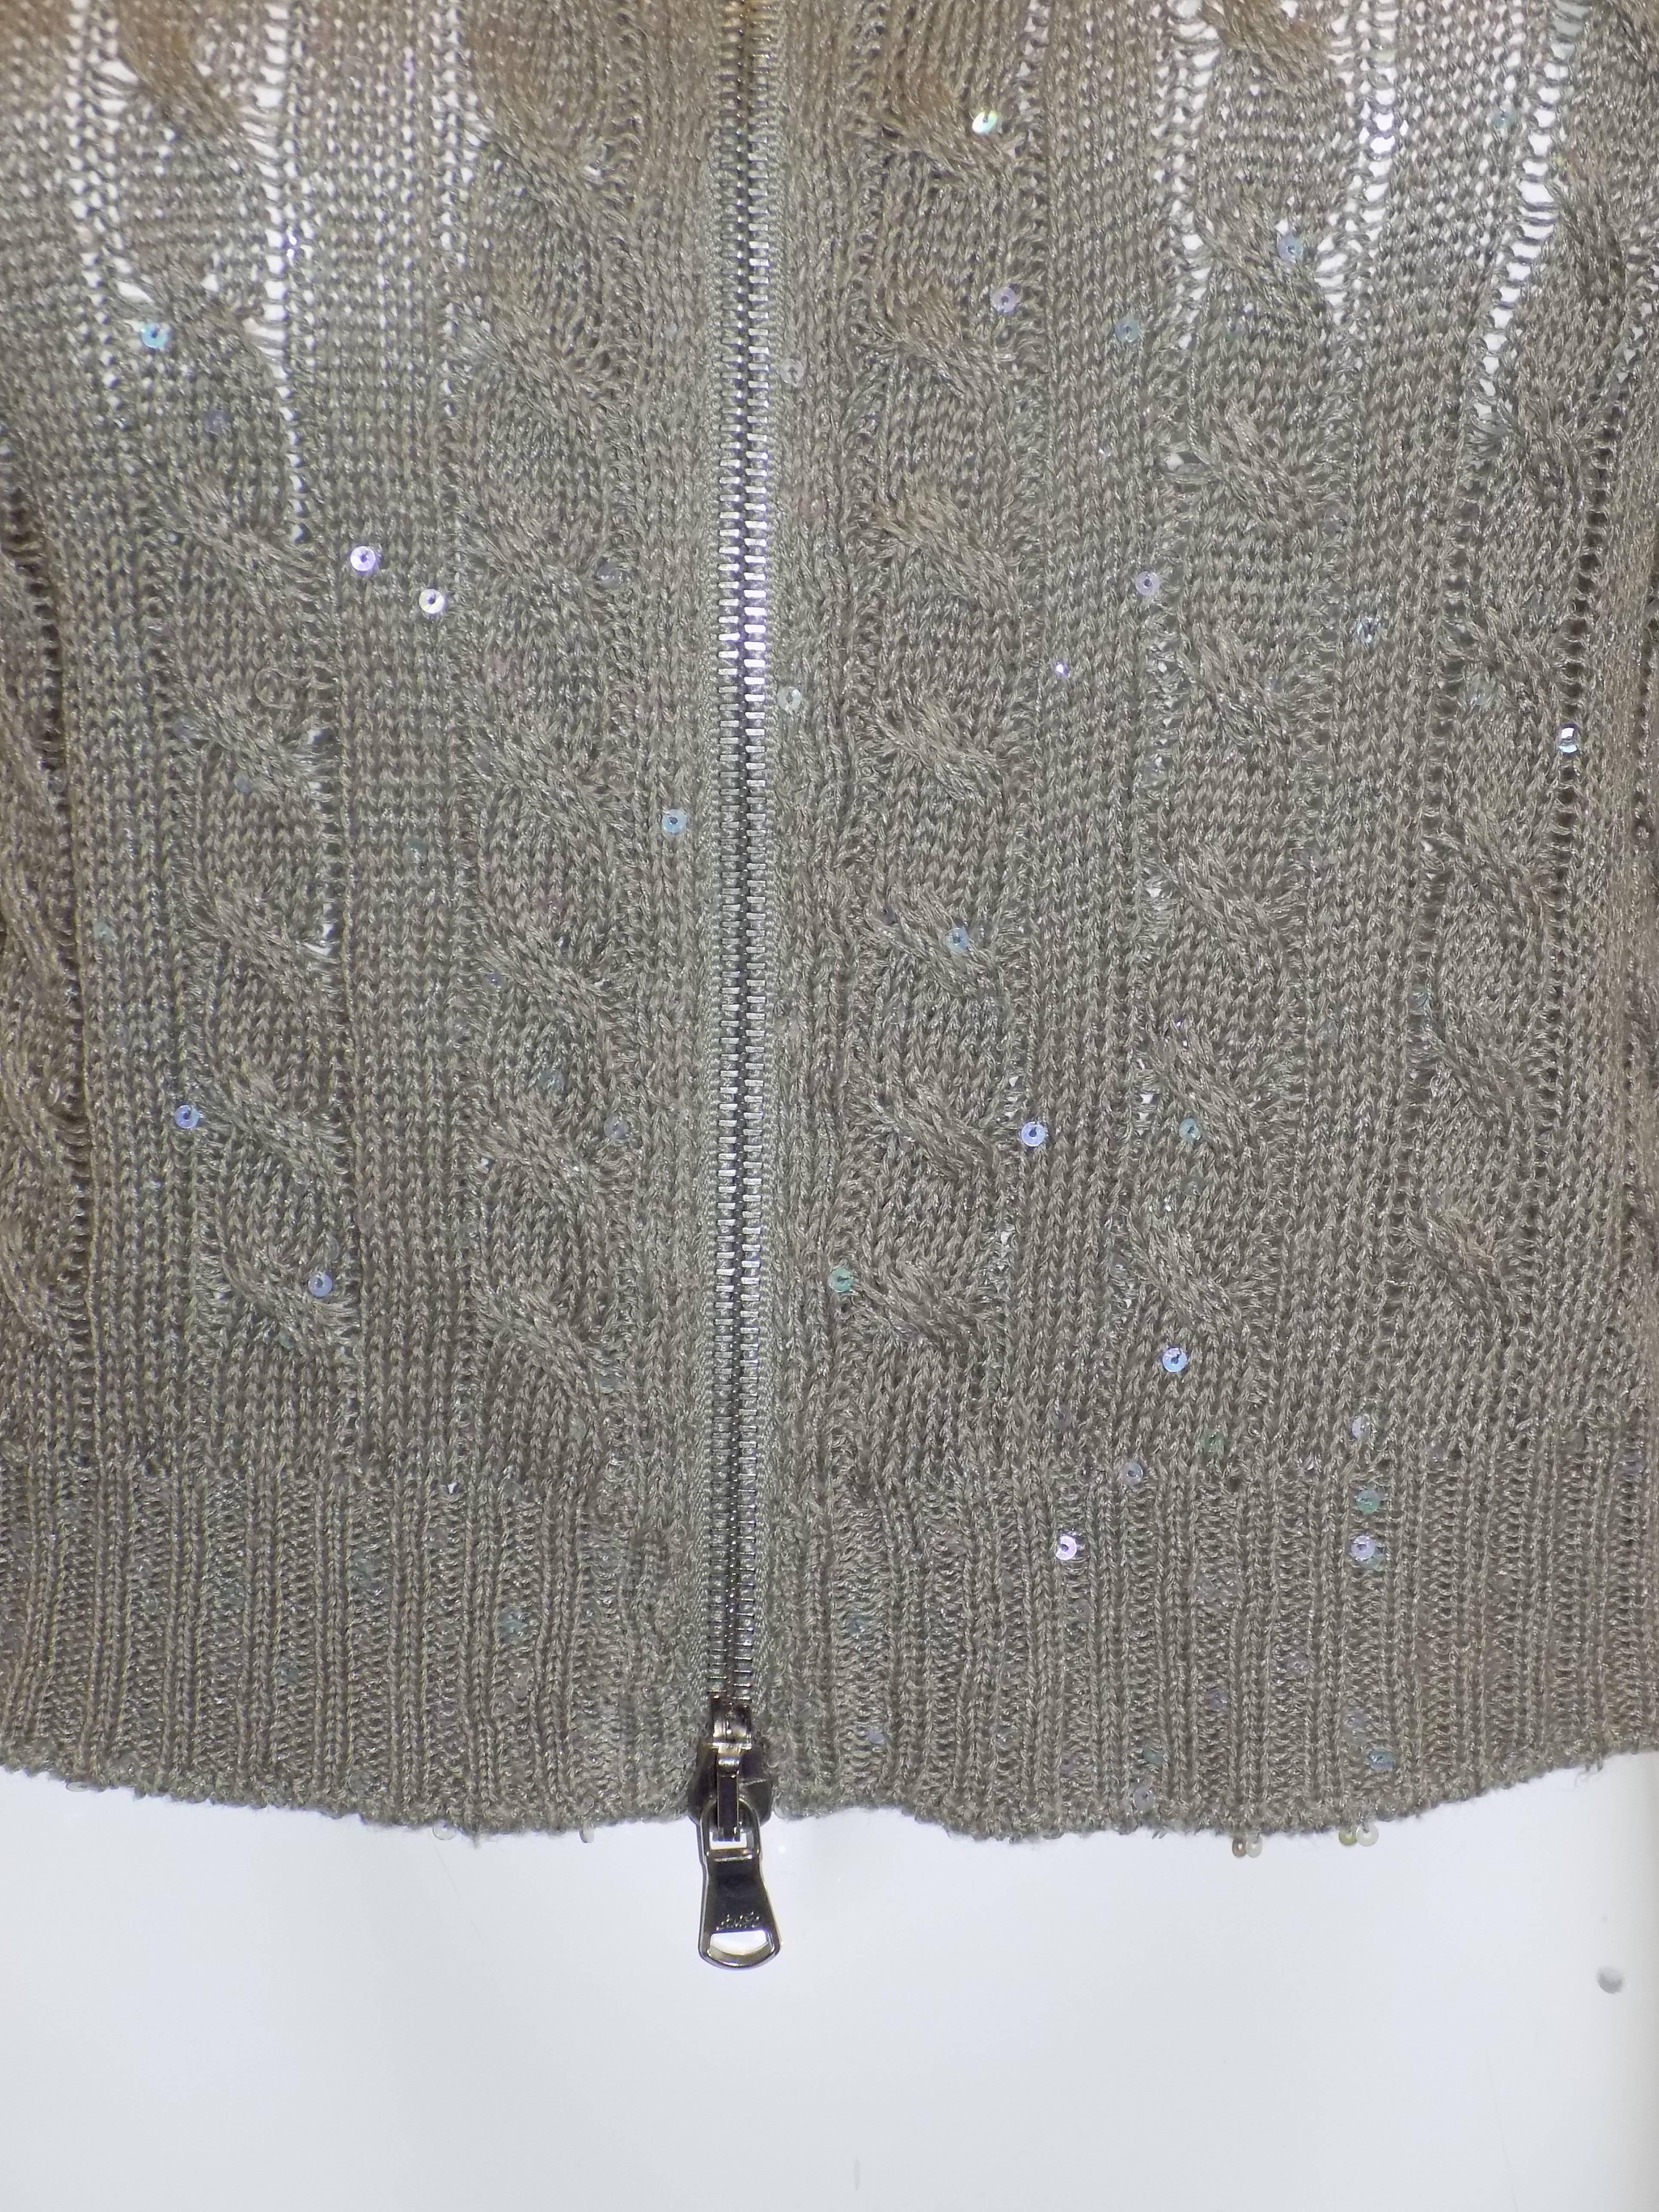 Brunello Cucinelli cable Knit Sequined Sweater cardigan crop top w zipper front In Excellent Condition In New York, NY